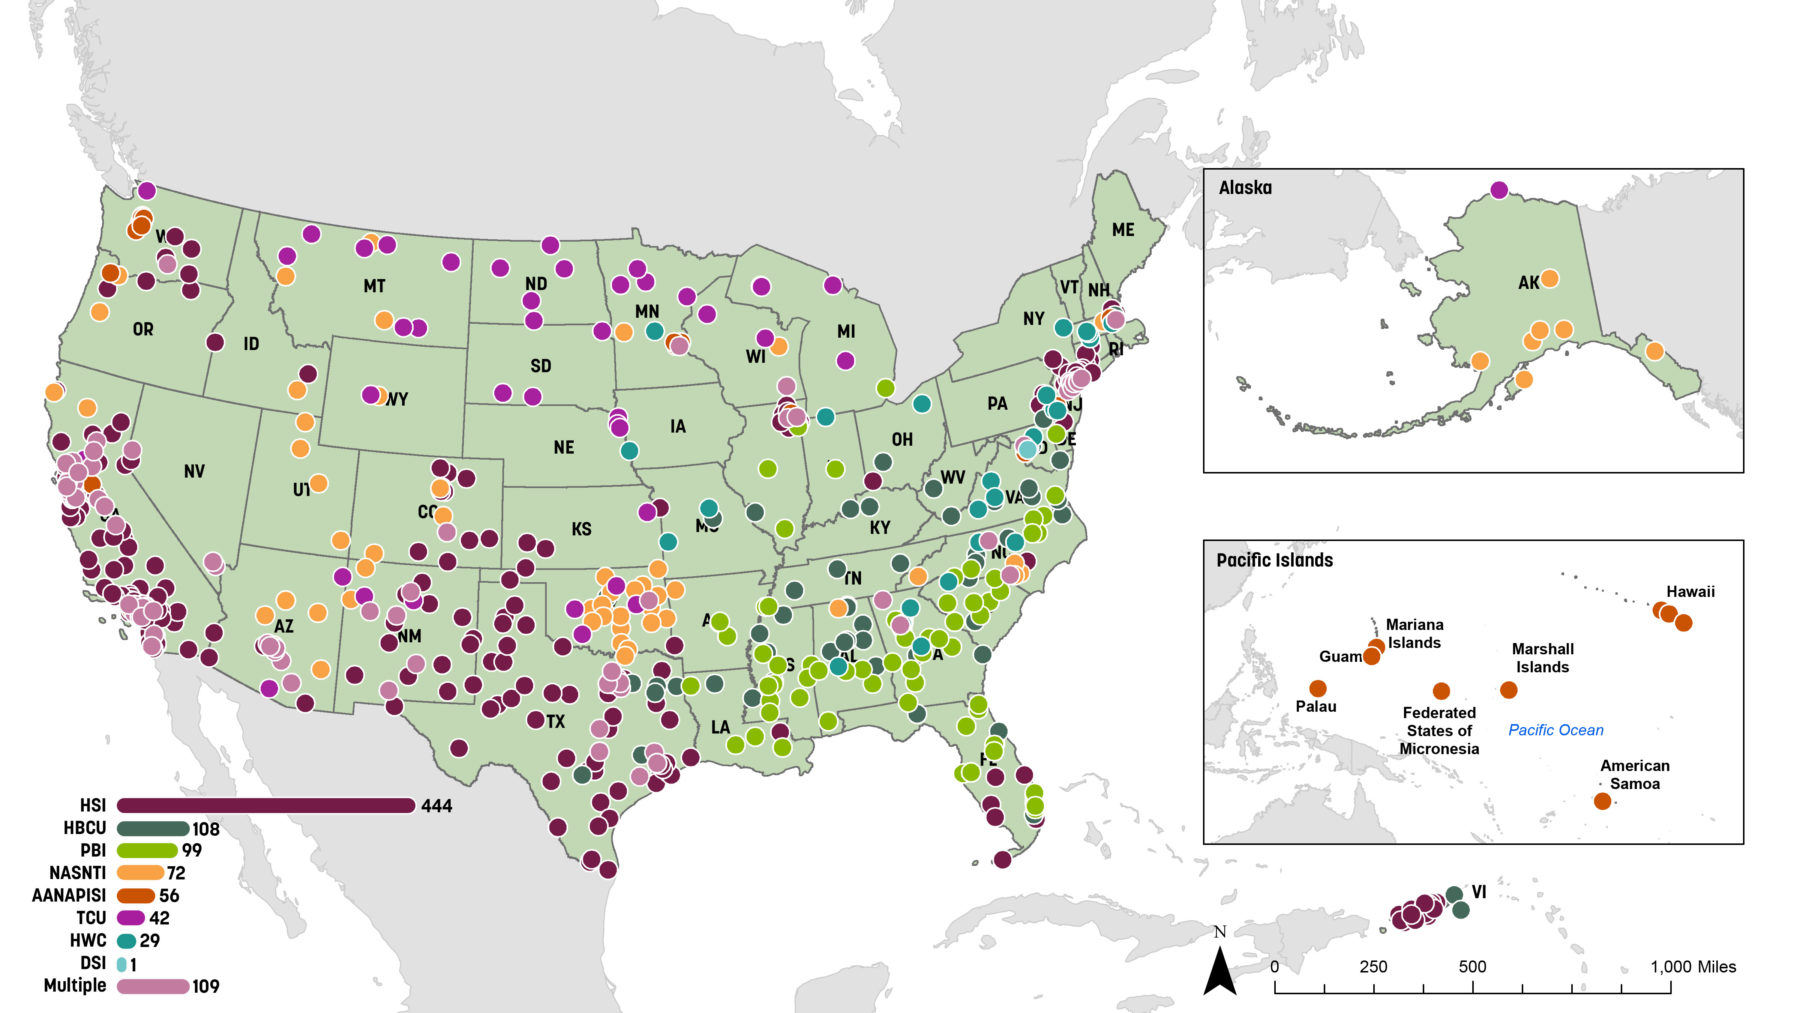 Map of colleges in the United States that primarily serve historically marginalized communities